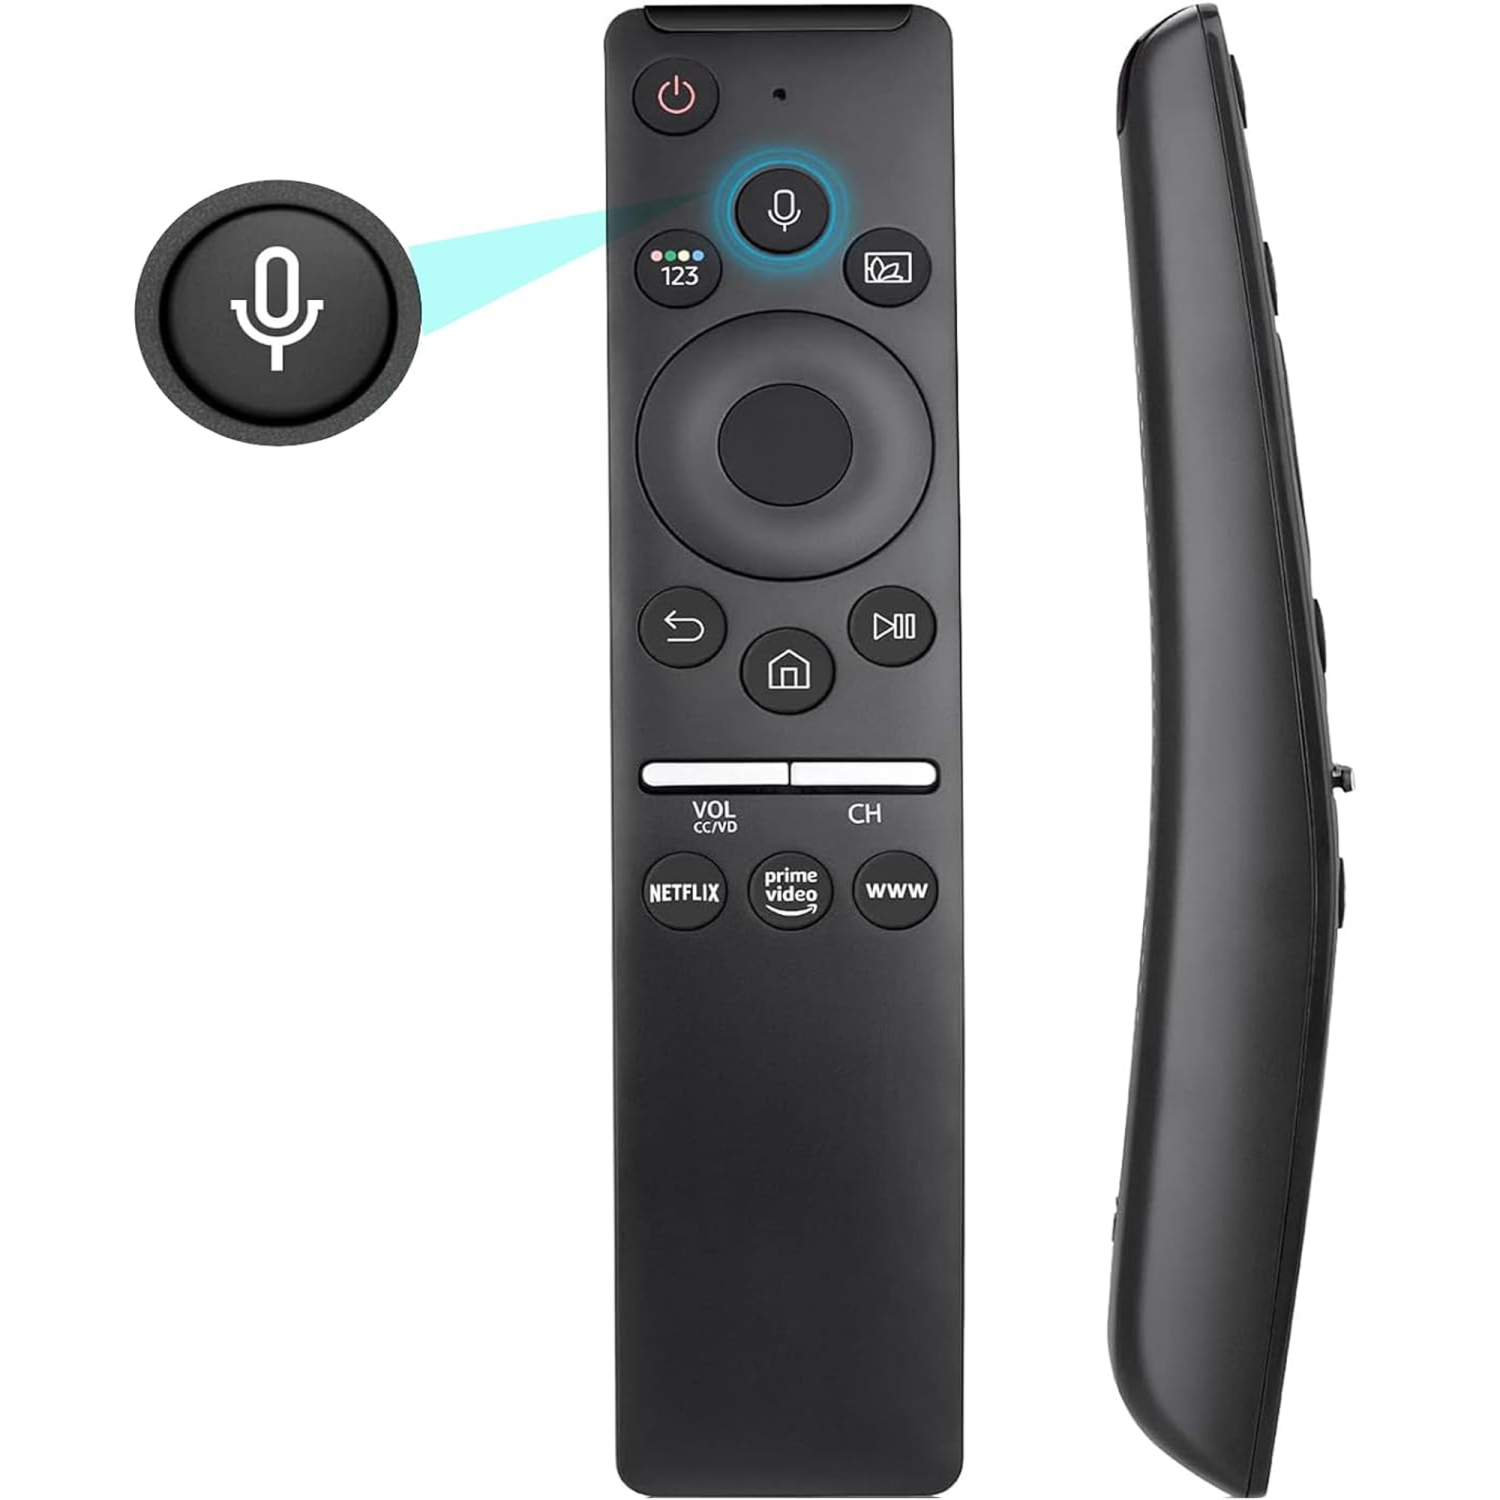 Newest BN59-01312A Voice Remote Control for Samsung QLED UHD 4K 8K 8 Series Smart TV Which Supported Voice Function